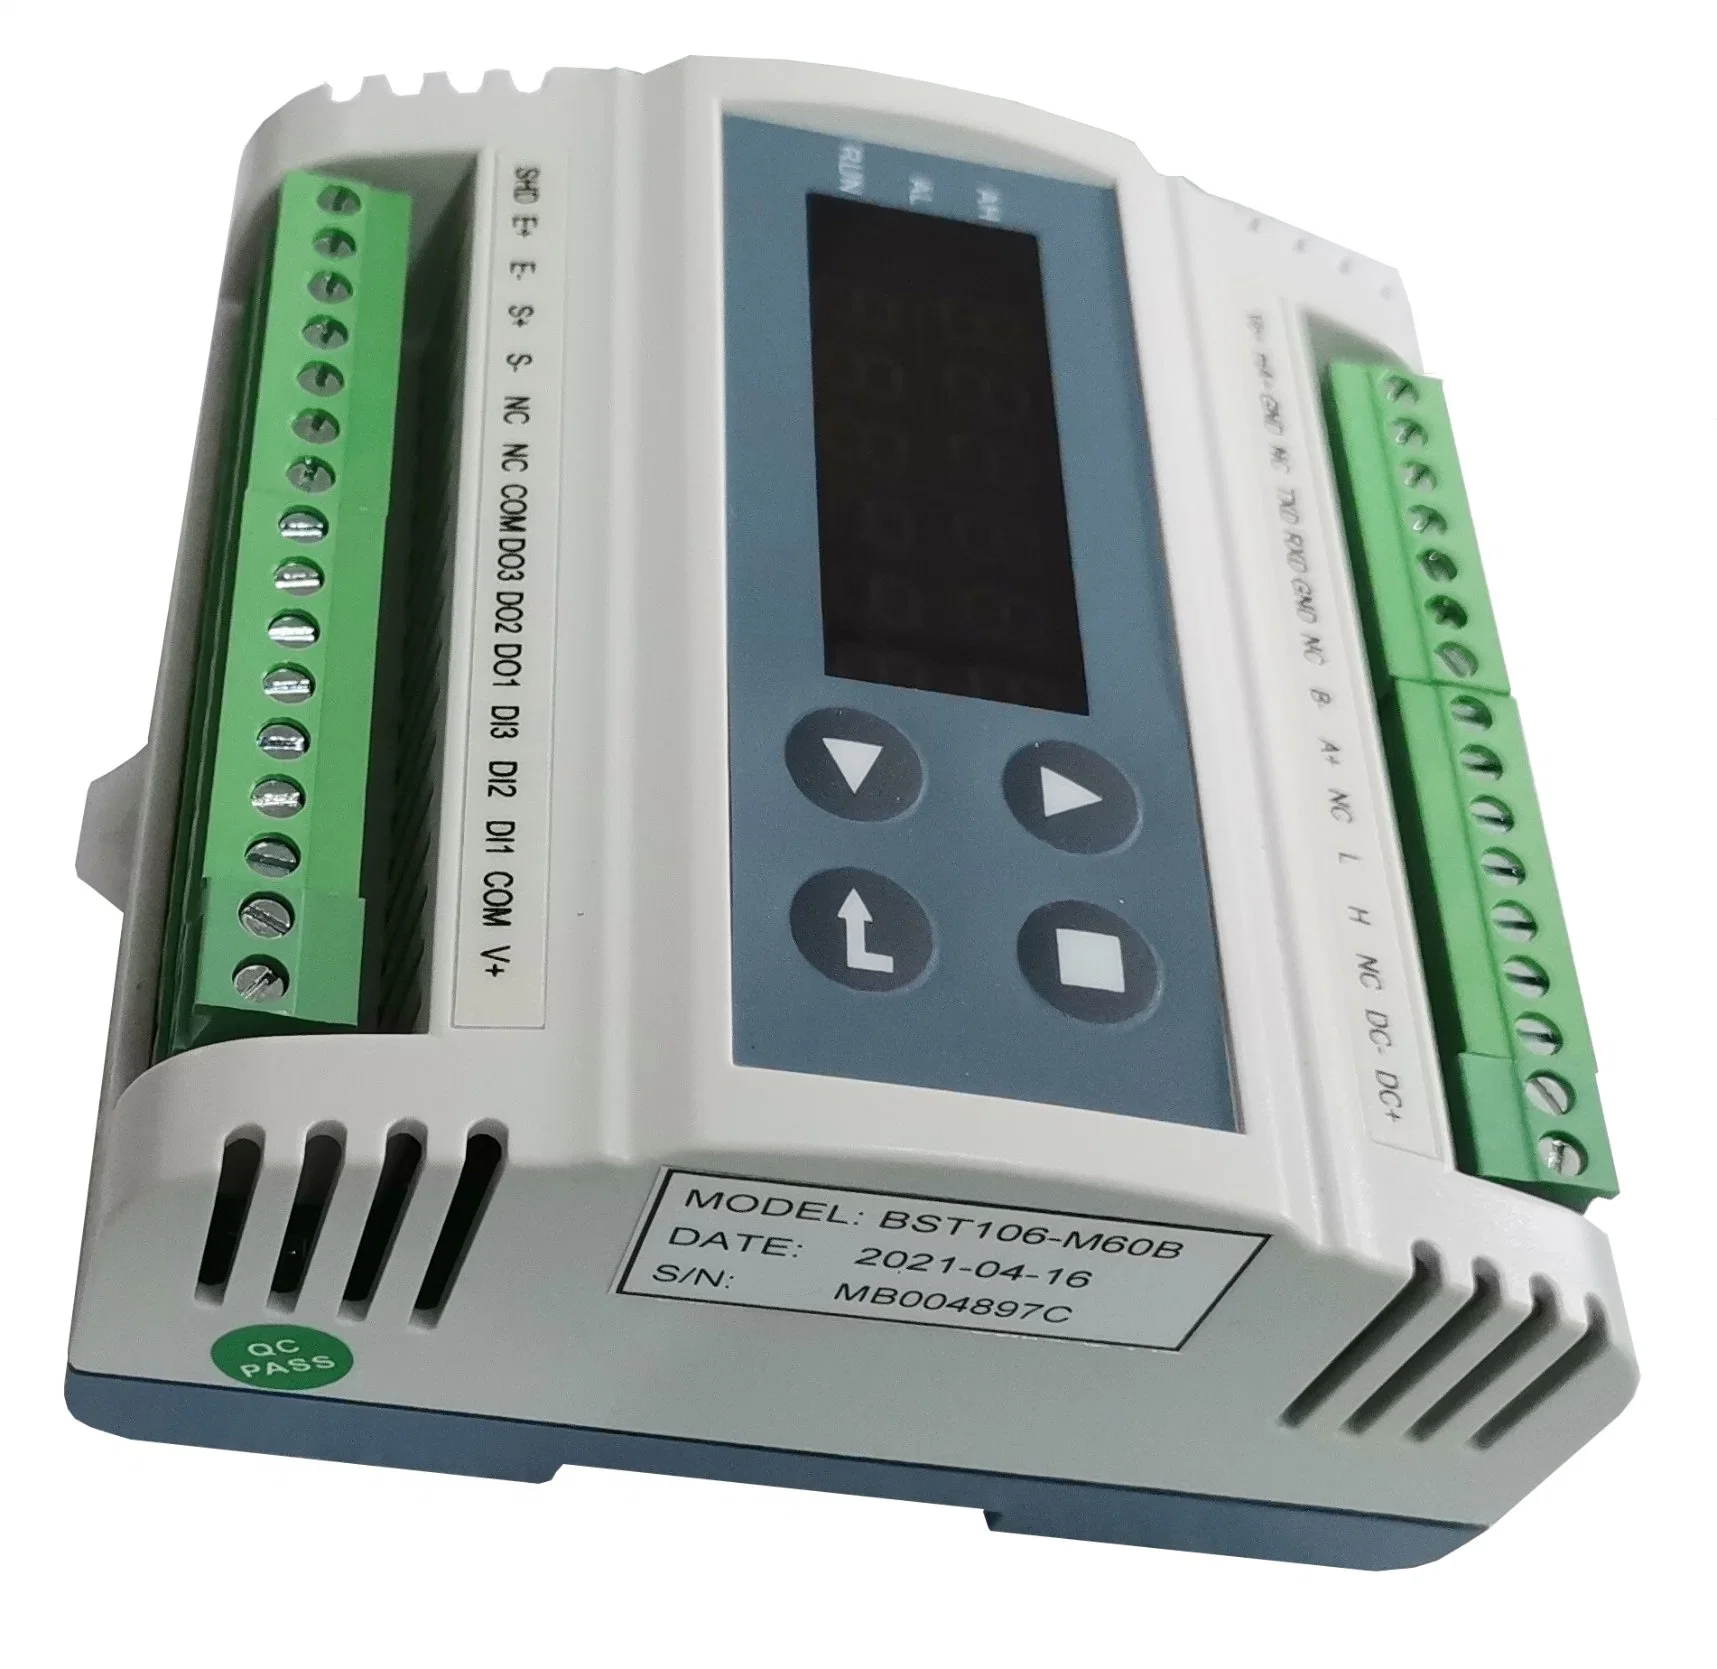 Supmeter Precision Digital Weight Controller for Rice Sugar Beans Packing Machine